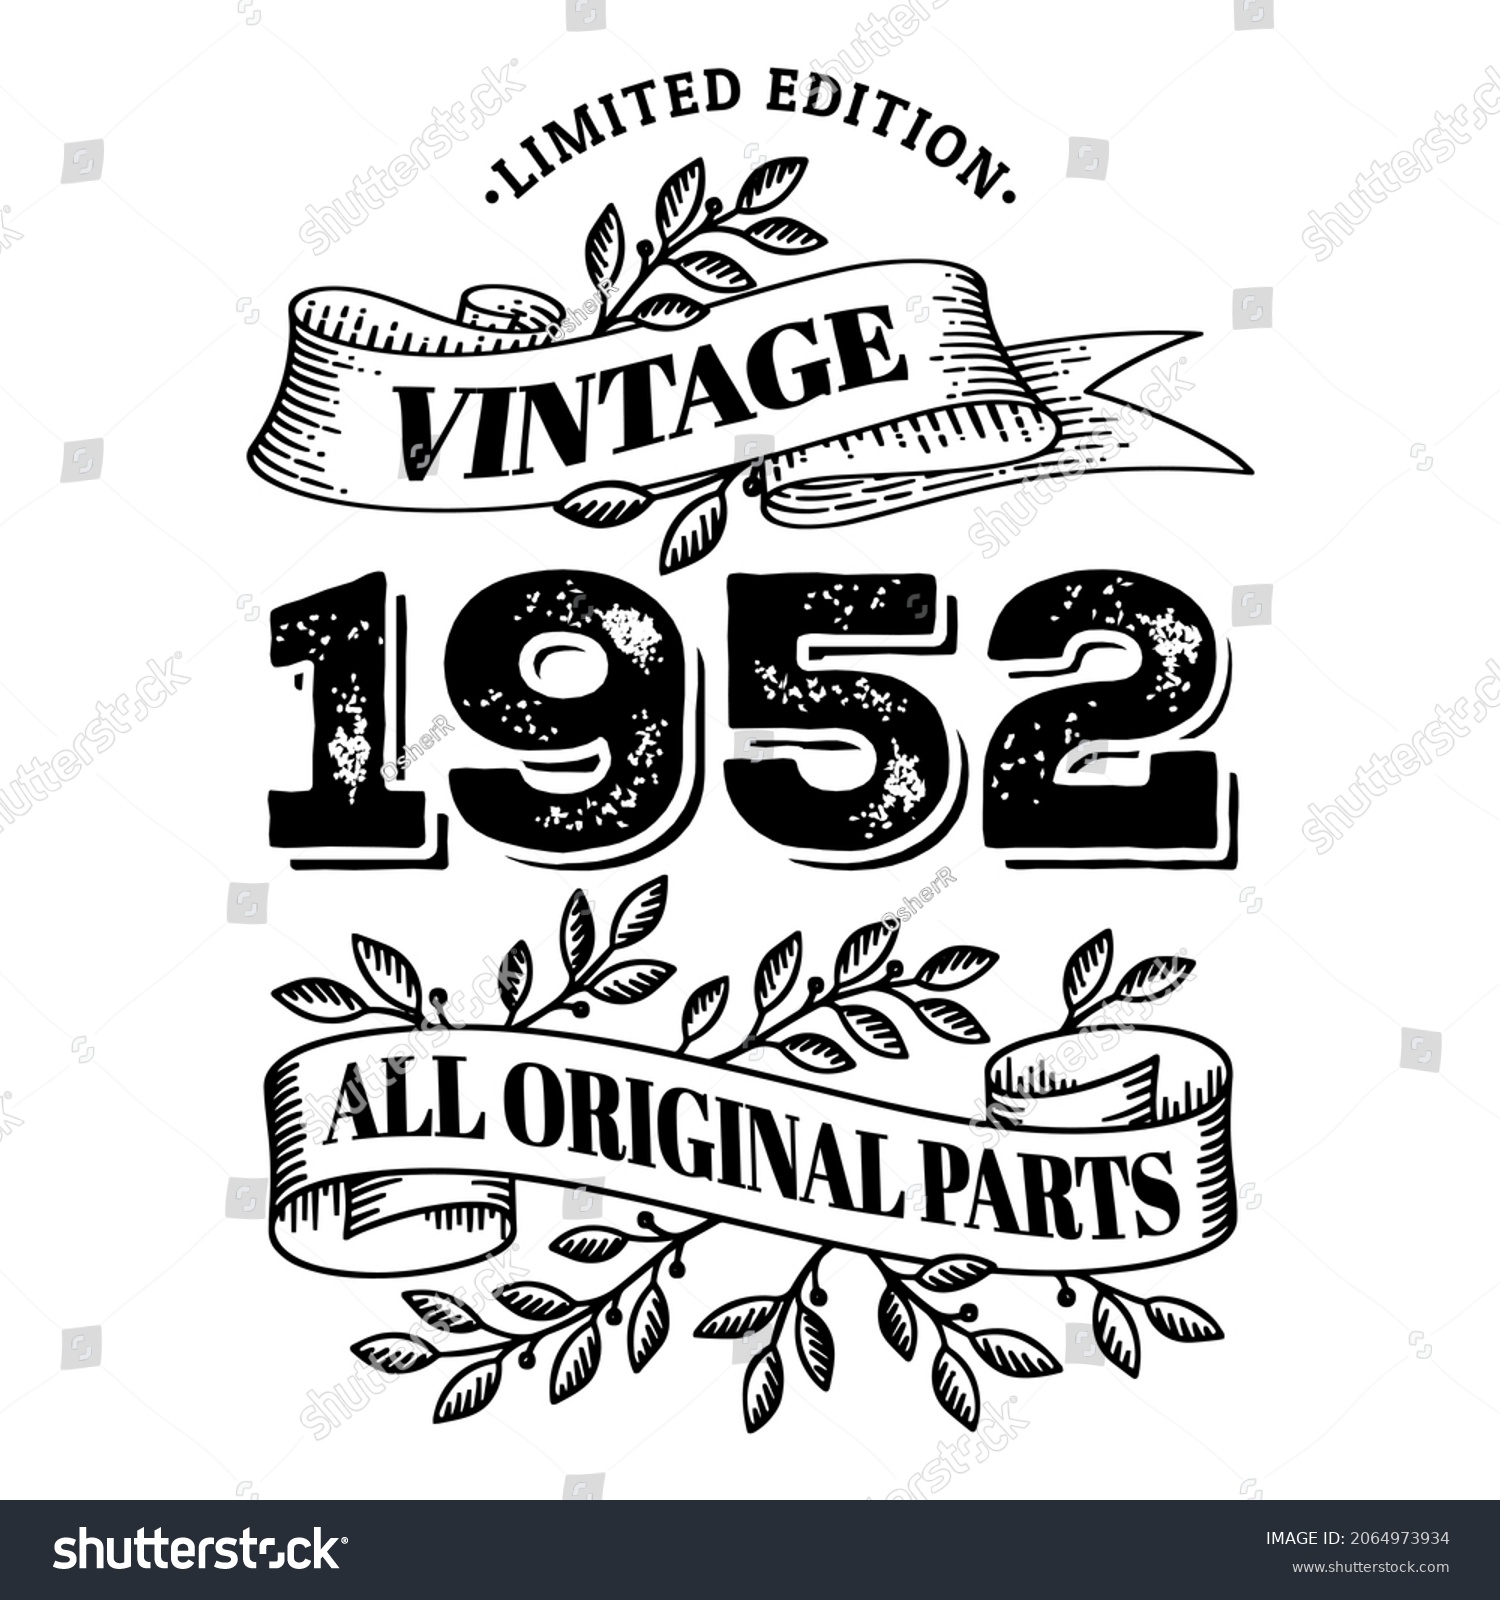 SVG of 1952 limited edition vintage all original parts. T shirt or birthday card text design. Vector illustration isolated on white background. svg